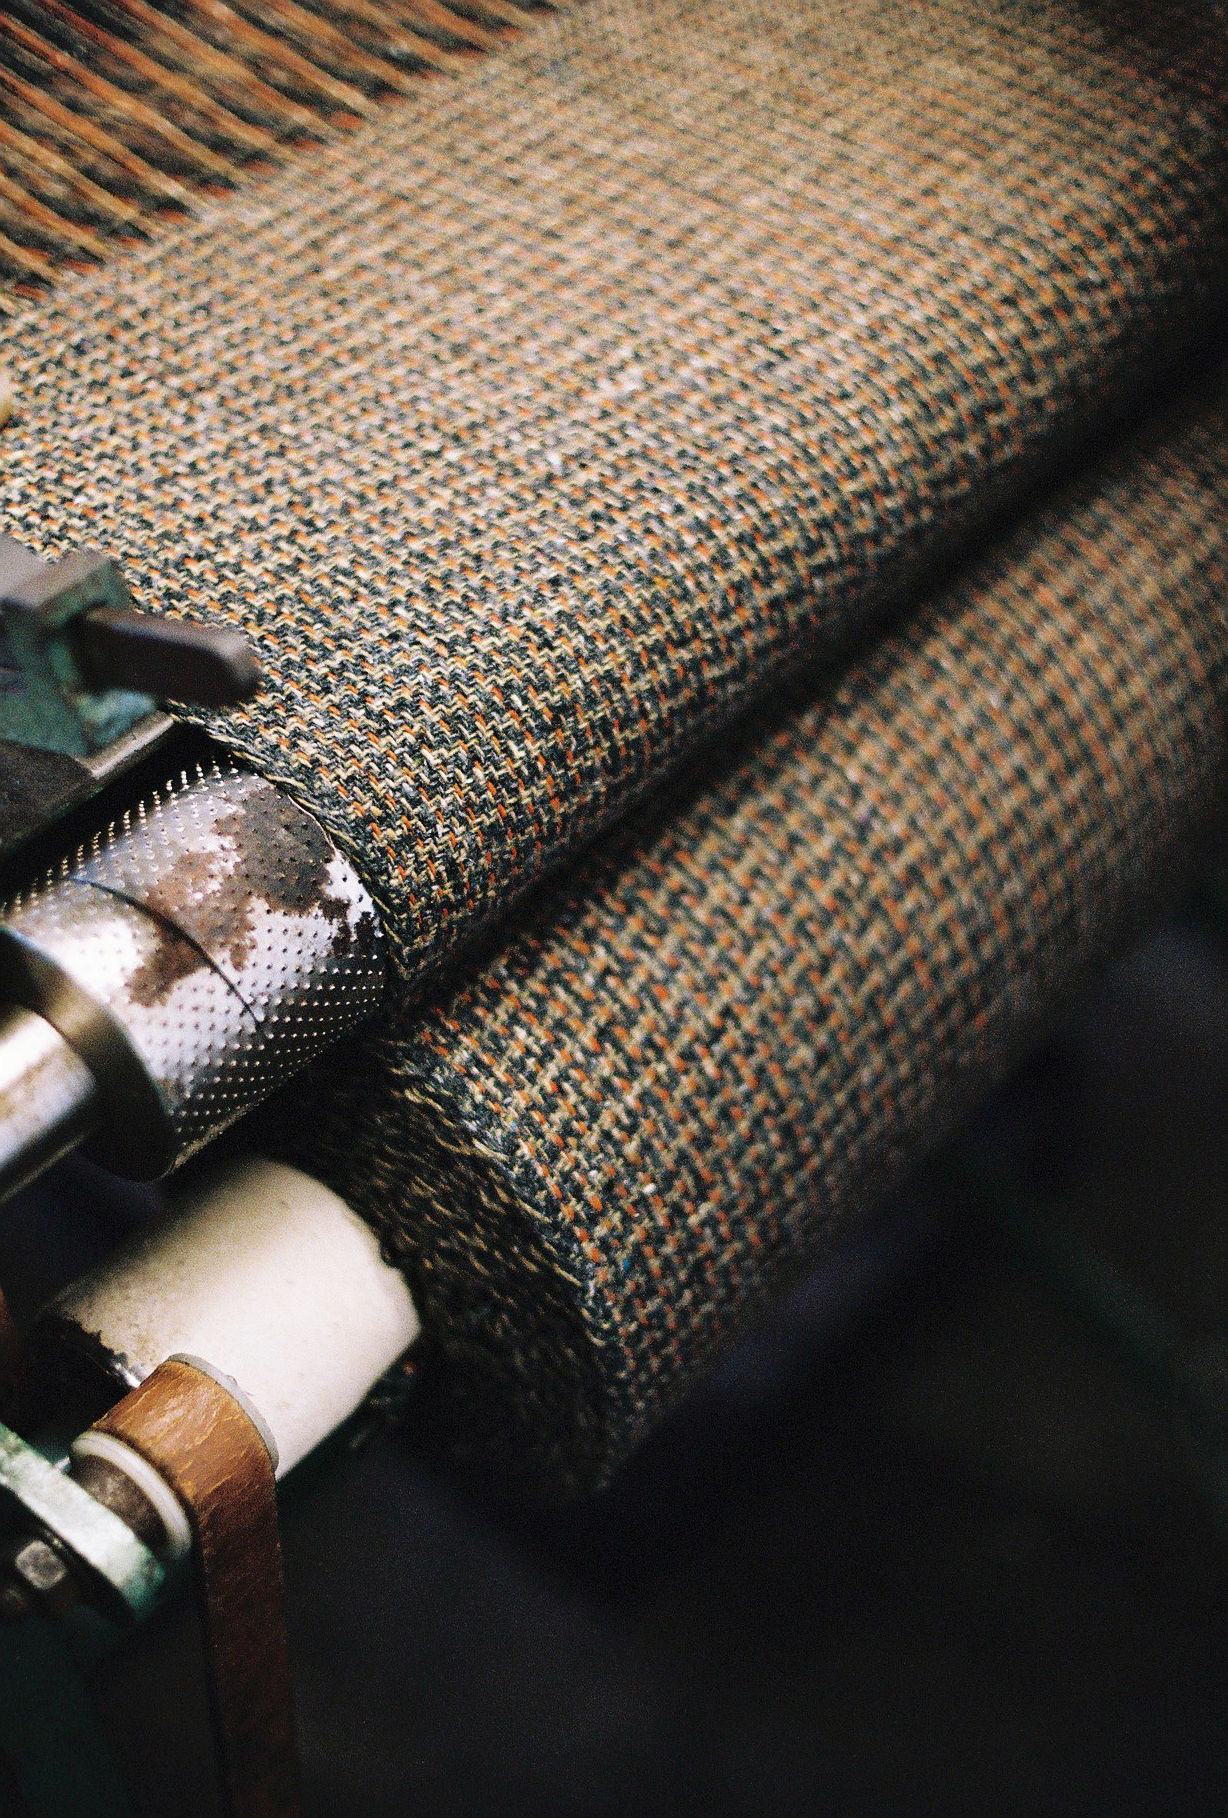 Tweeds & Wants: Talking to Sam Goates from Woven In The Bone